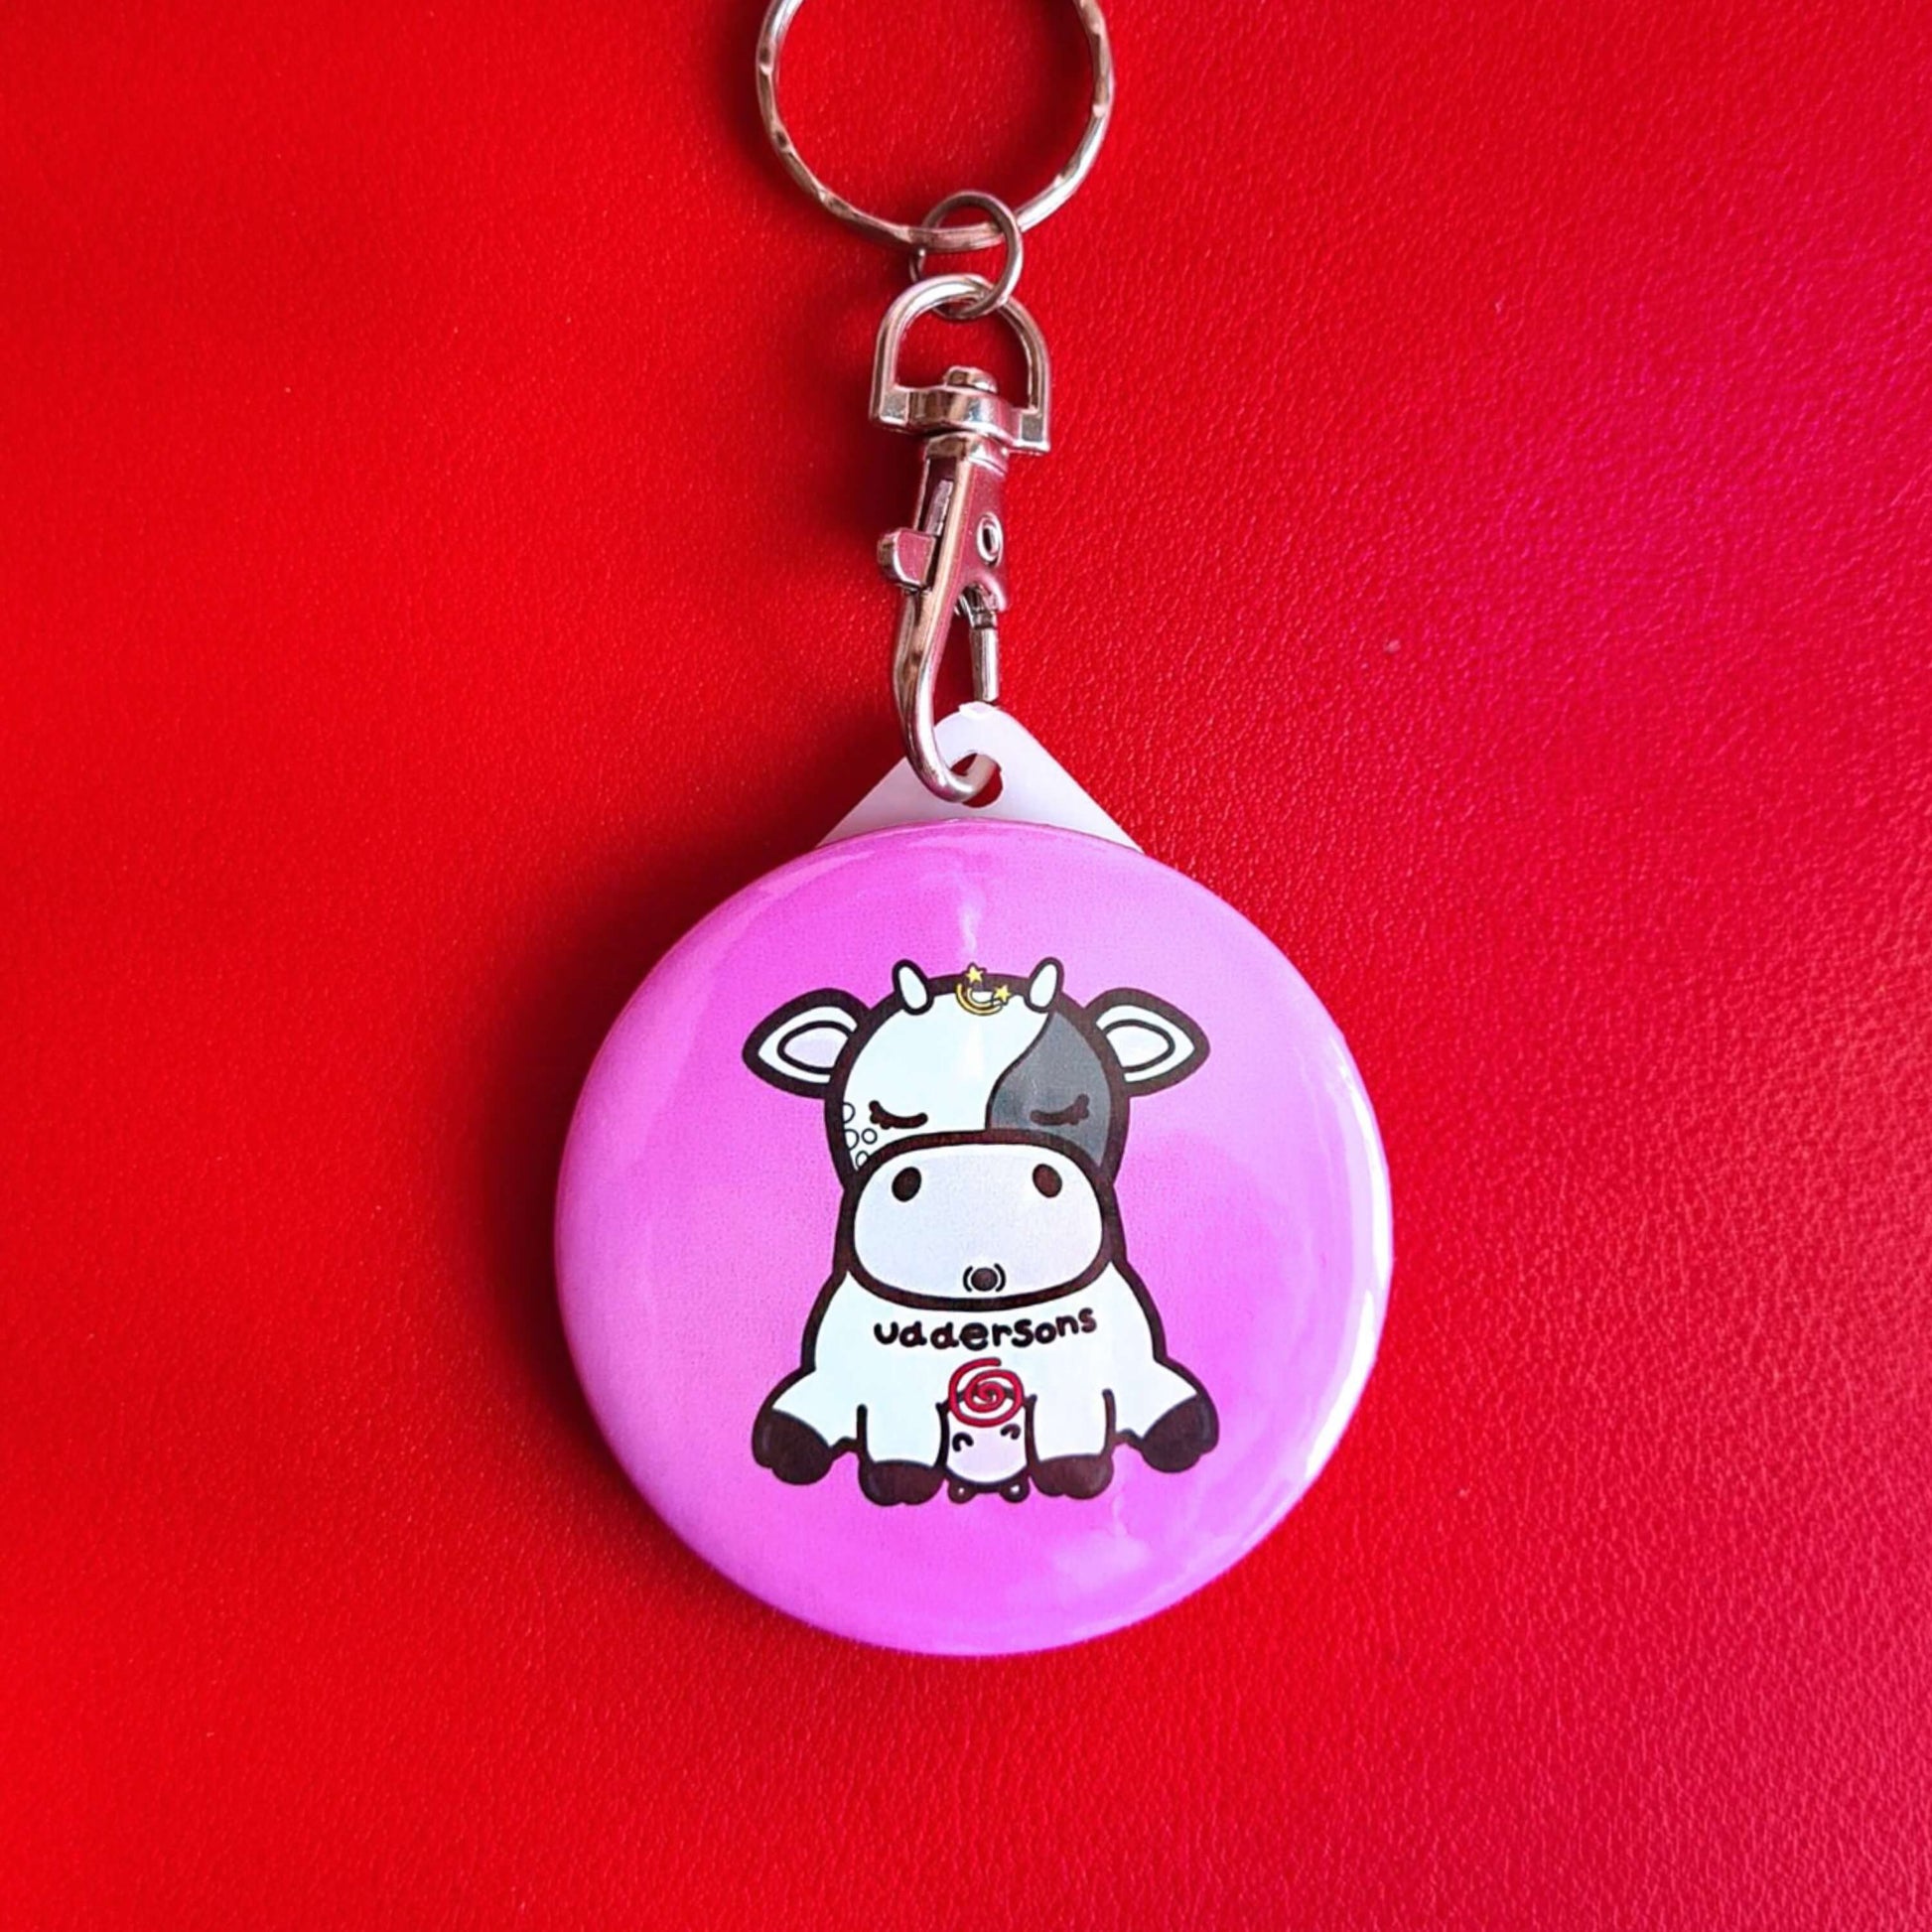 The Uddersons Cow Keyring - Addisons Disease on a red background. The silver clip pink plastic circular keyring features a tired looking black and white cow with a stars above its head, a red swirl on its belly and black text across reading 'uddersons'. The hand drawn design is raising awareness for addisons disease.